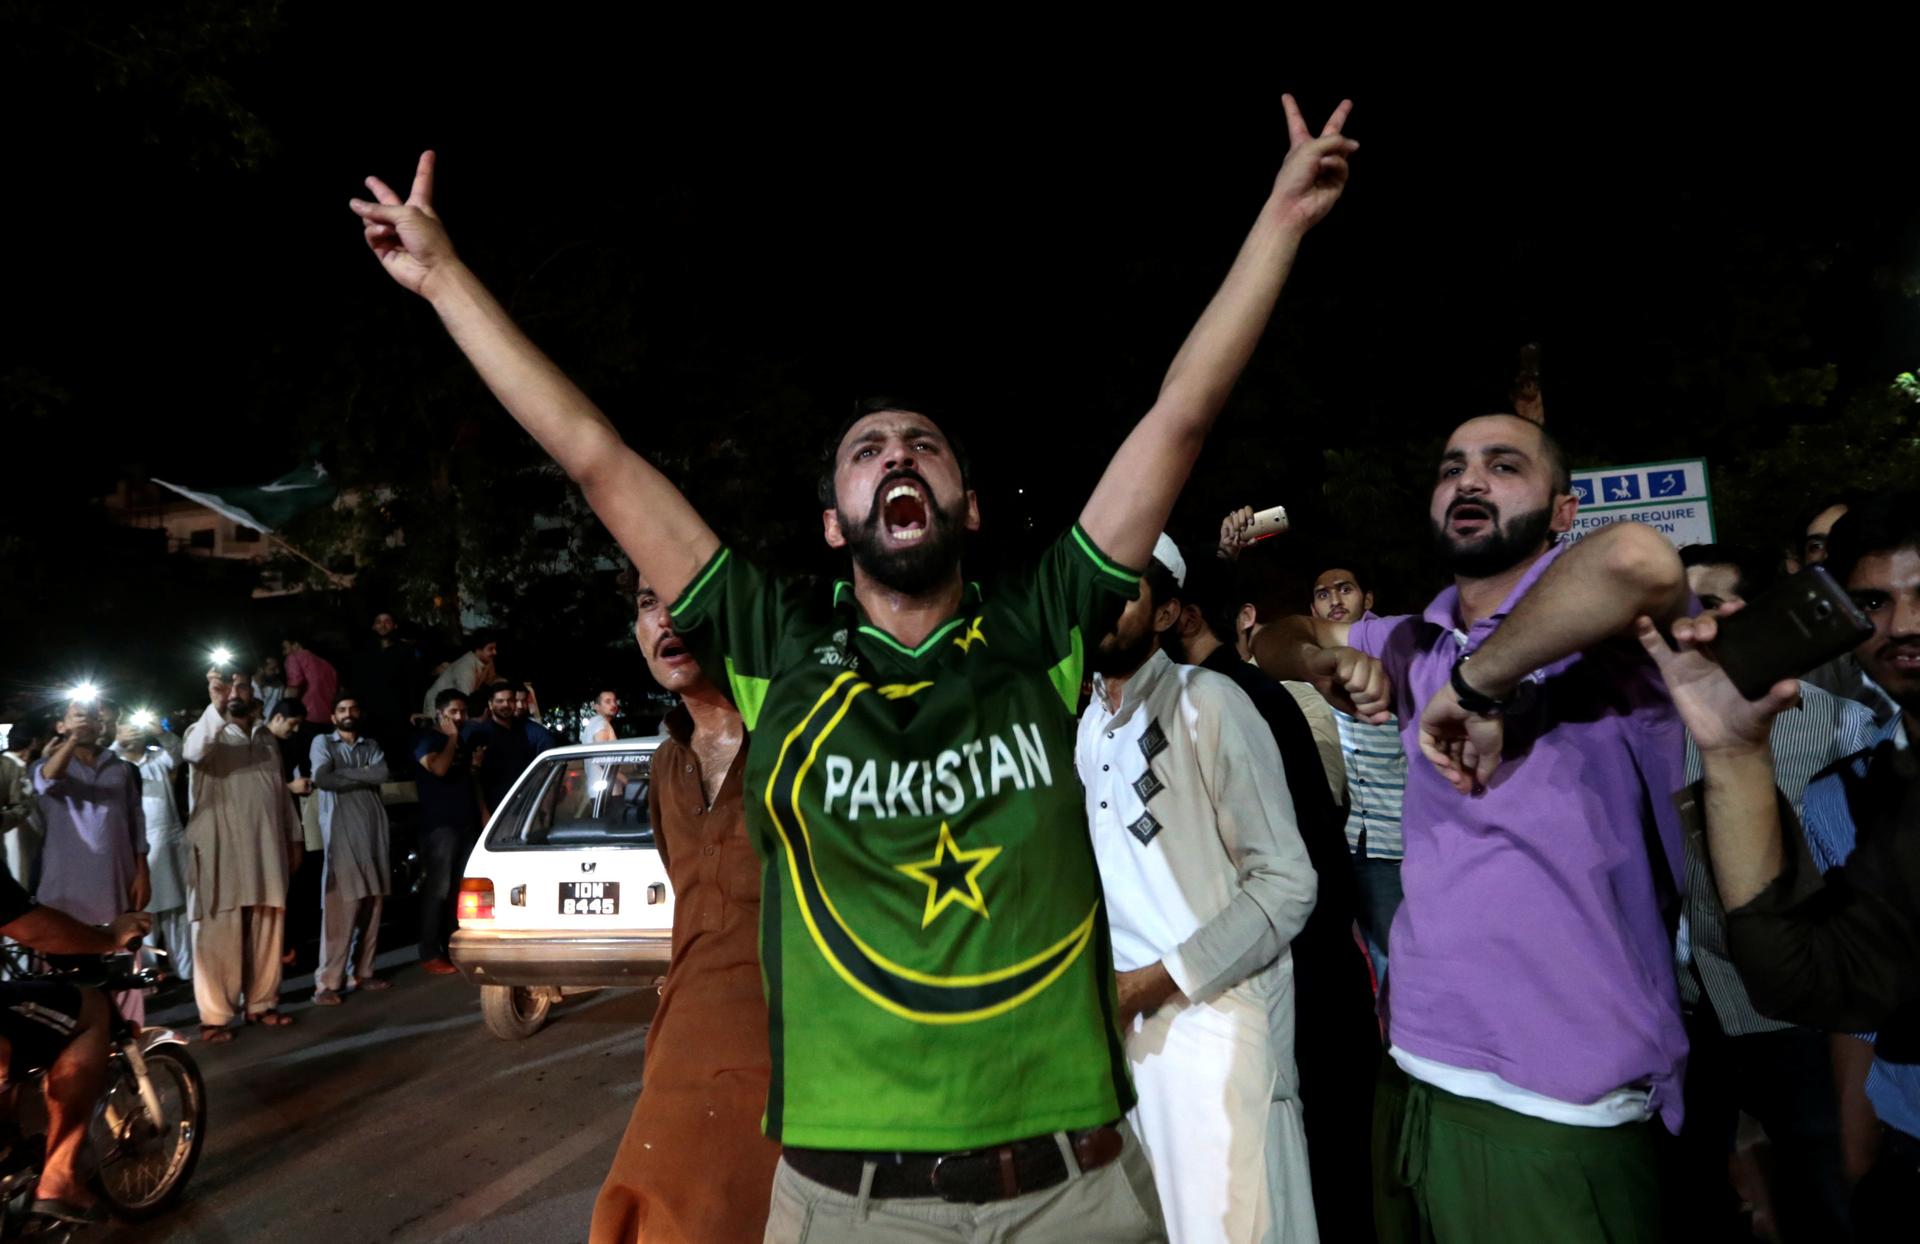 Pakistani cricket fans, in Islamabad, cheer after Pakistan defeated India in the Champions Trophy finals